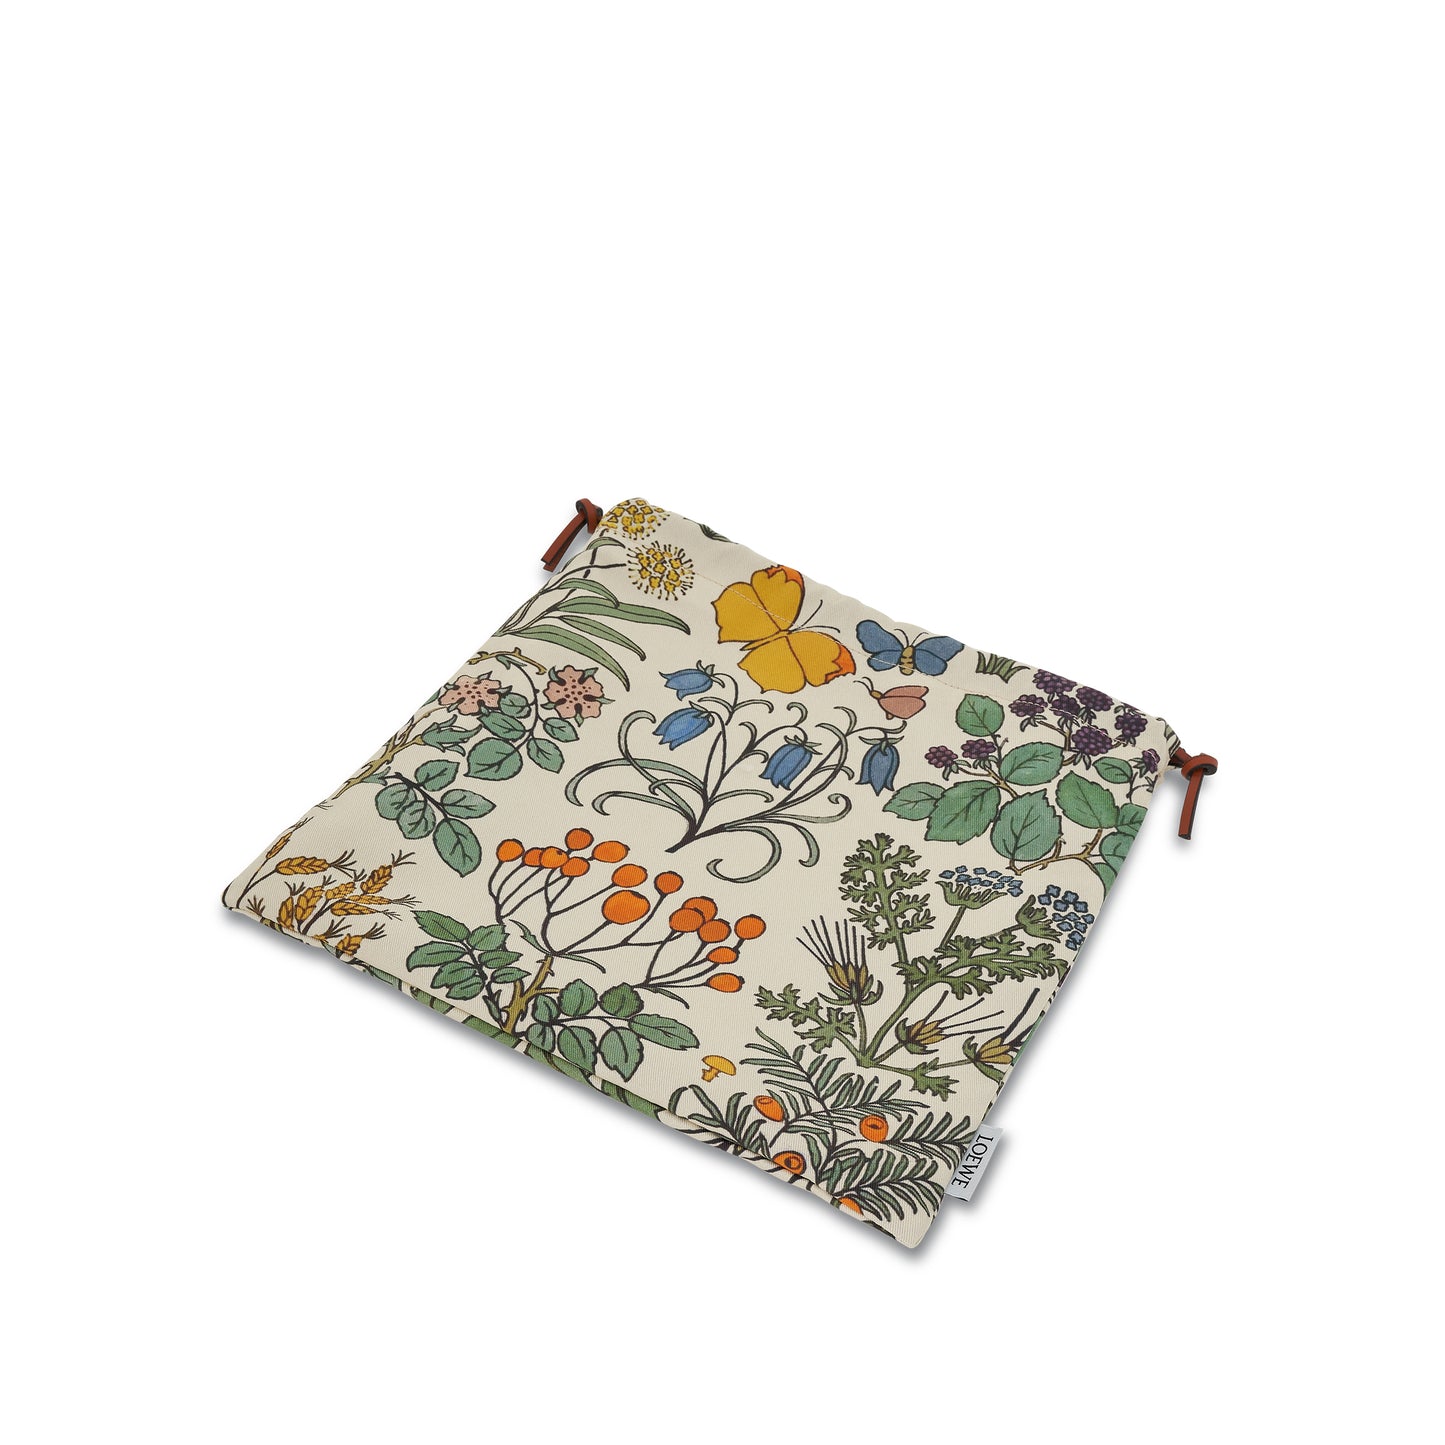 Herbarium Drawstring Pouch in Canvas and Calfskin in Soft White